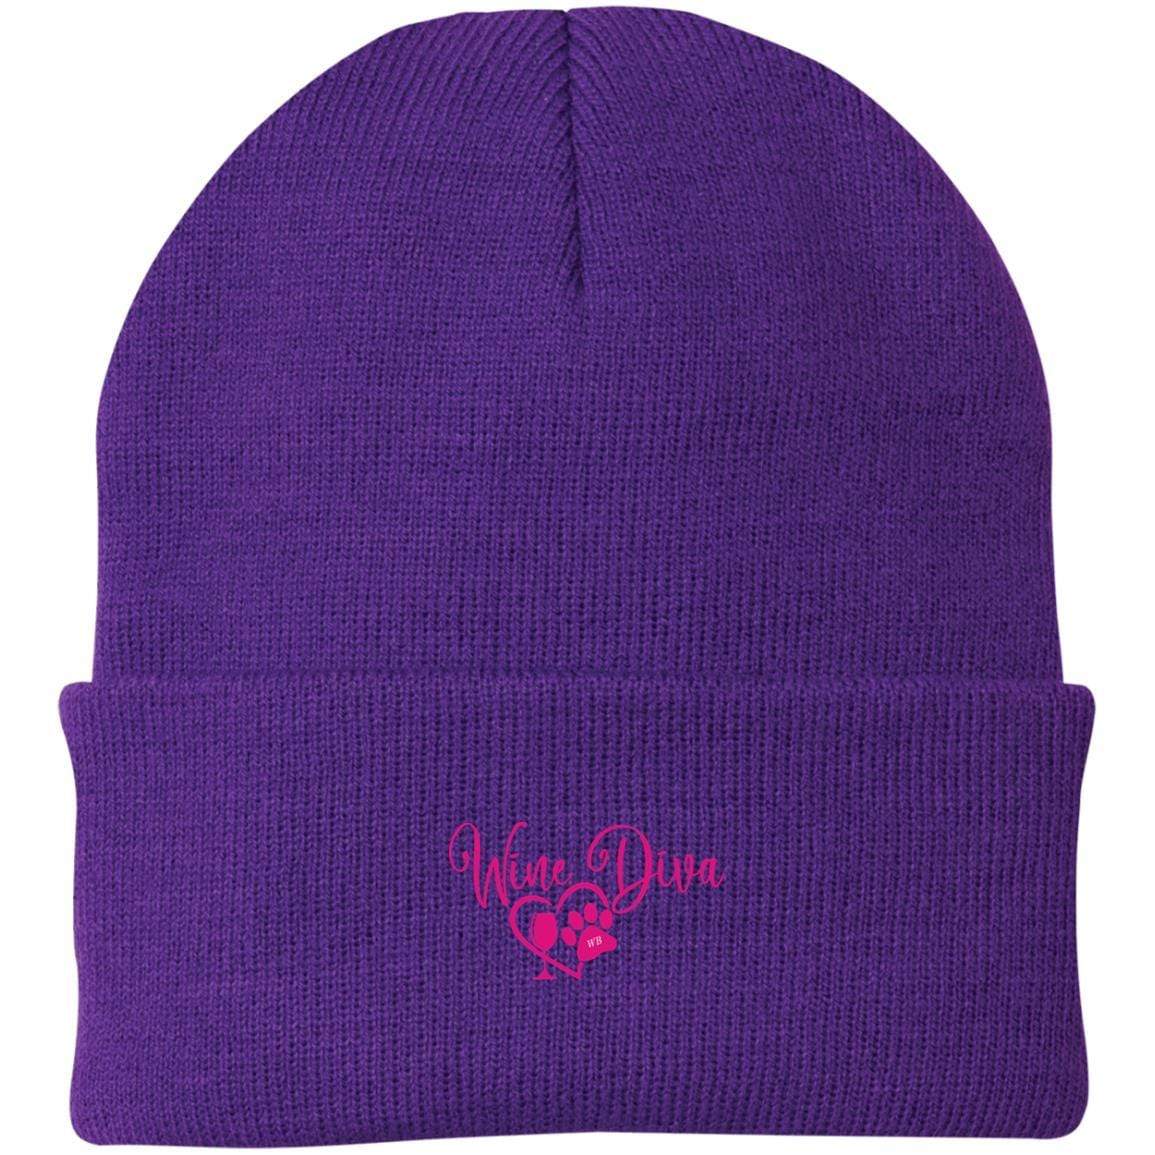 Hats Athletic Purple / One Size Winey Bitches Co "Wine Diva" Embroidered Knit Cap WineyBitchesCo